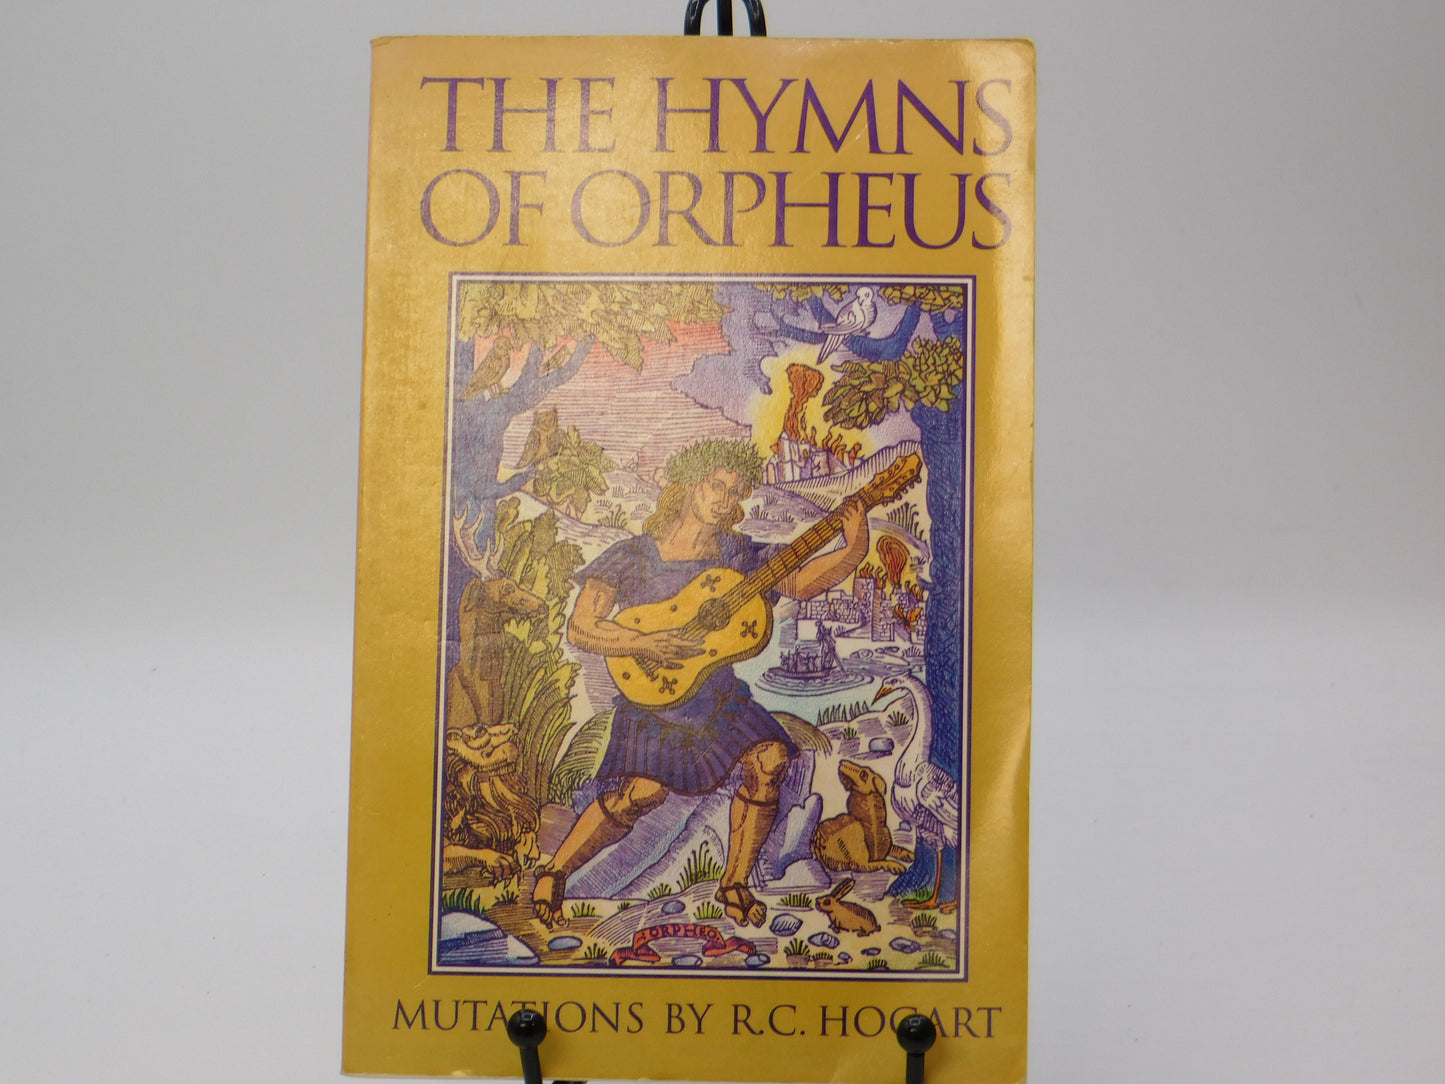 The Hymns of Orpheus by R.C. Hogart